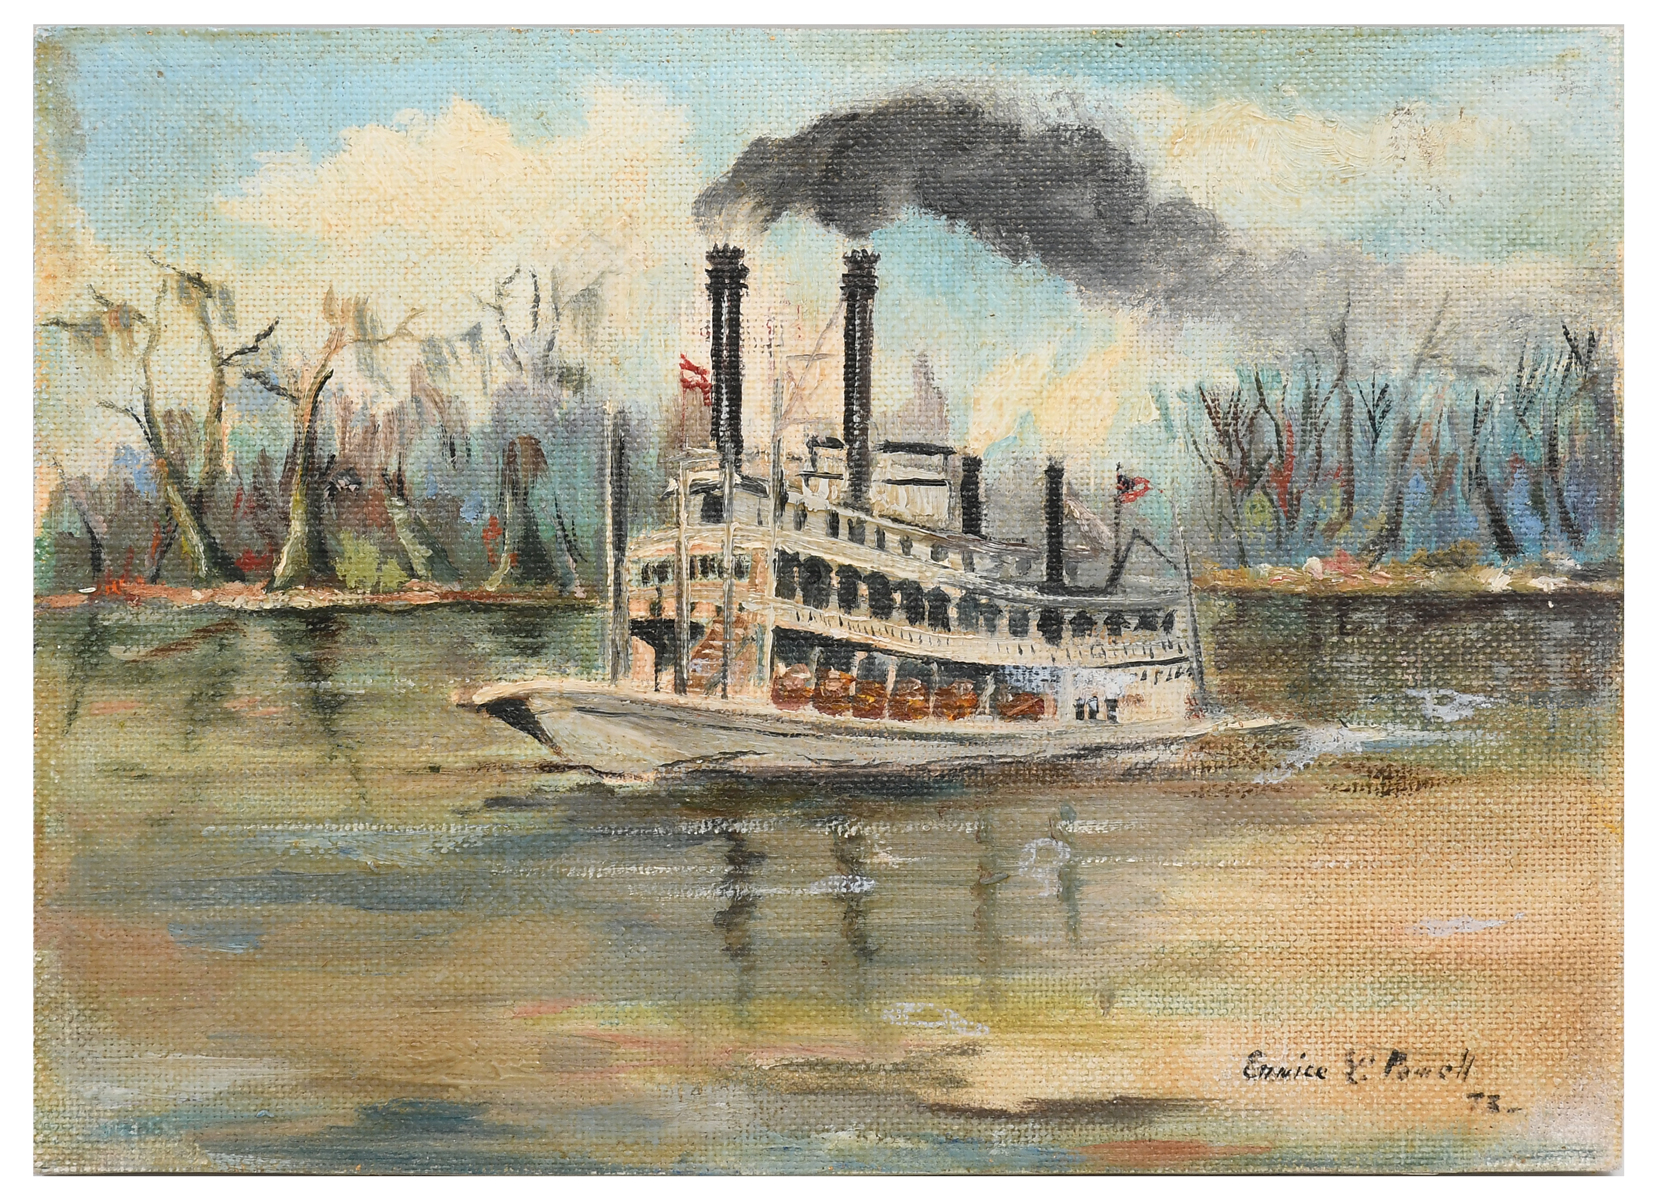 EUNICE POWELL STEAMBOAT PAINTING: